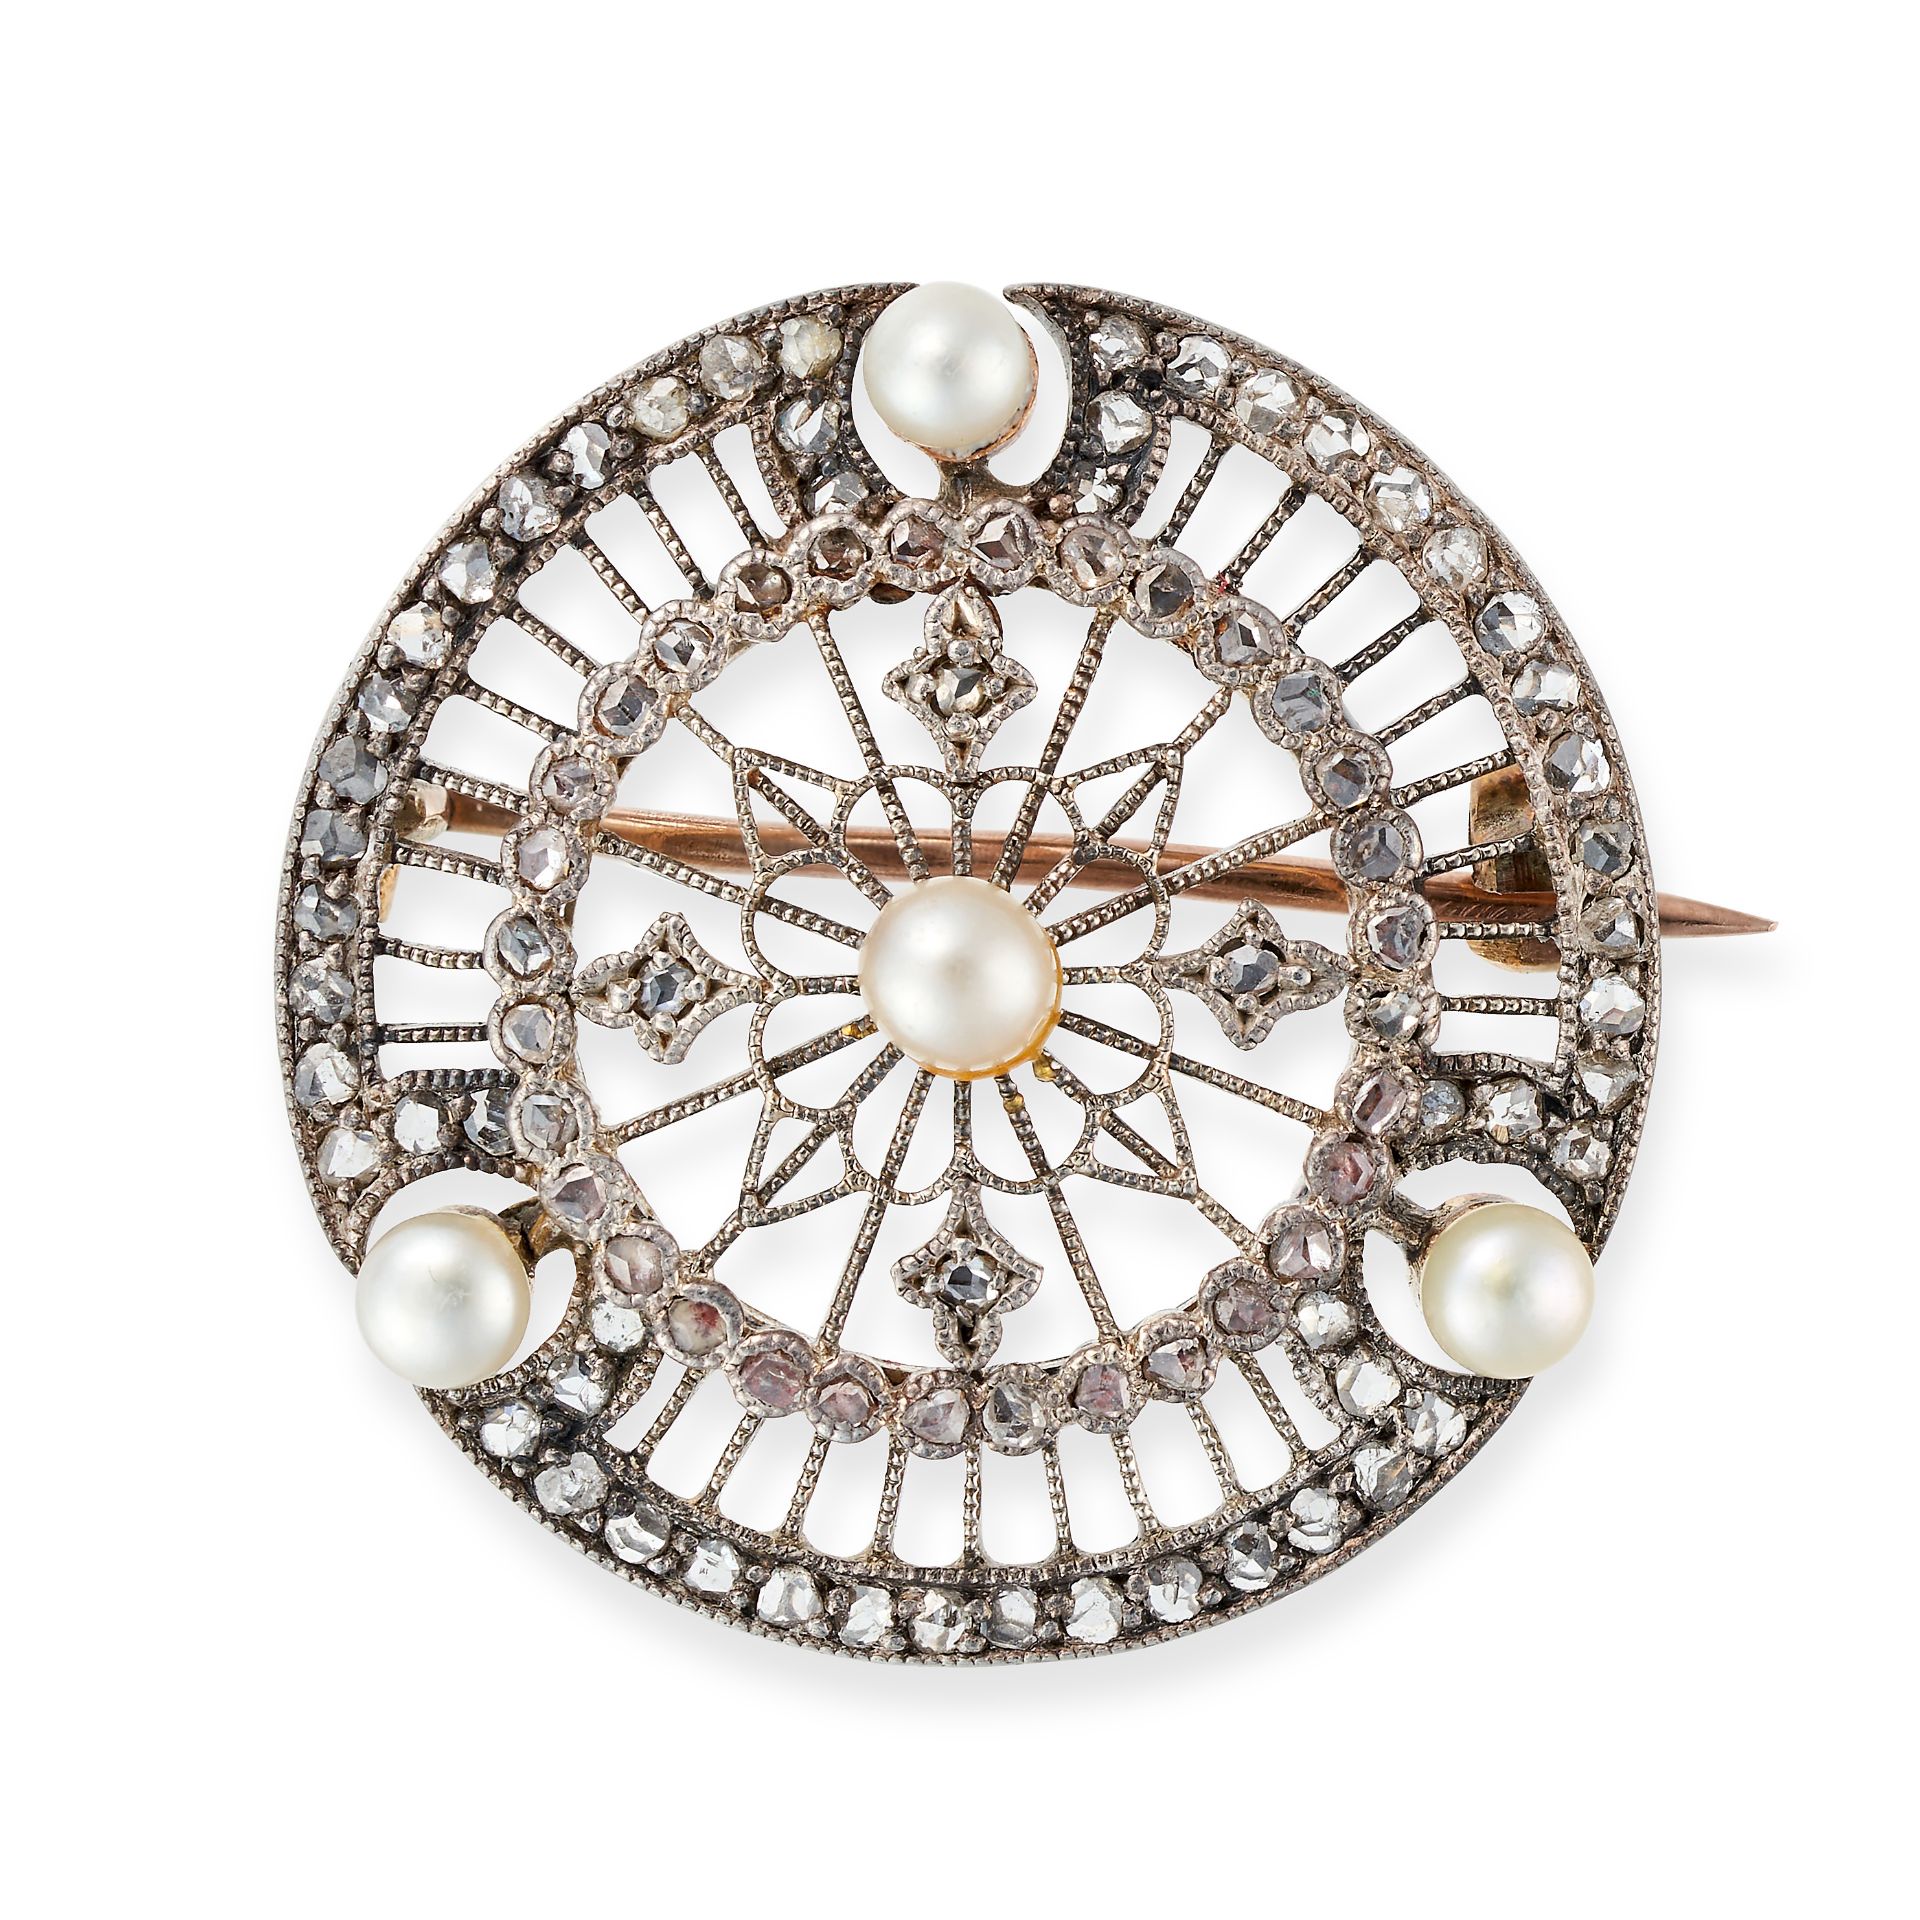 AN ANTIQUE DIAMOND AND PEARL BROOCH, EARLY 20TH CENTURY the openwork brooch set throughout with r...